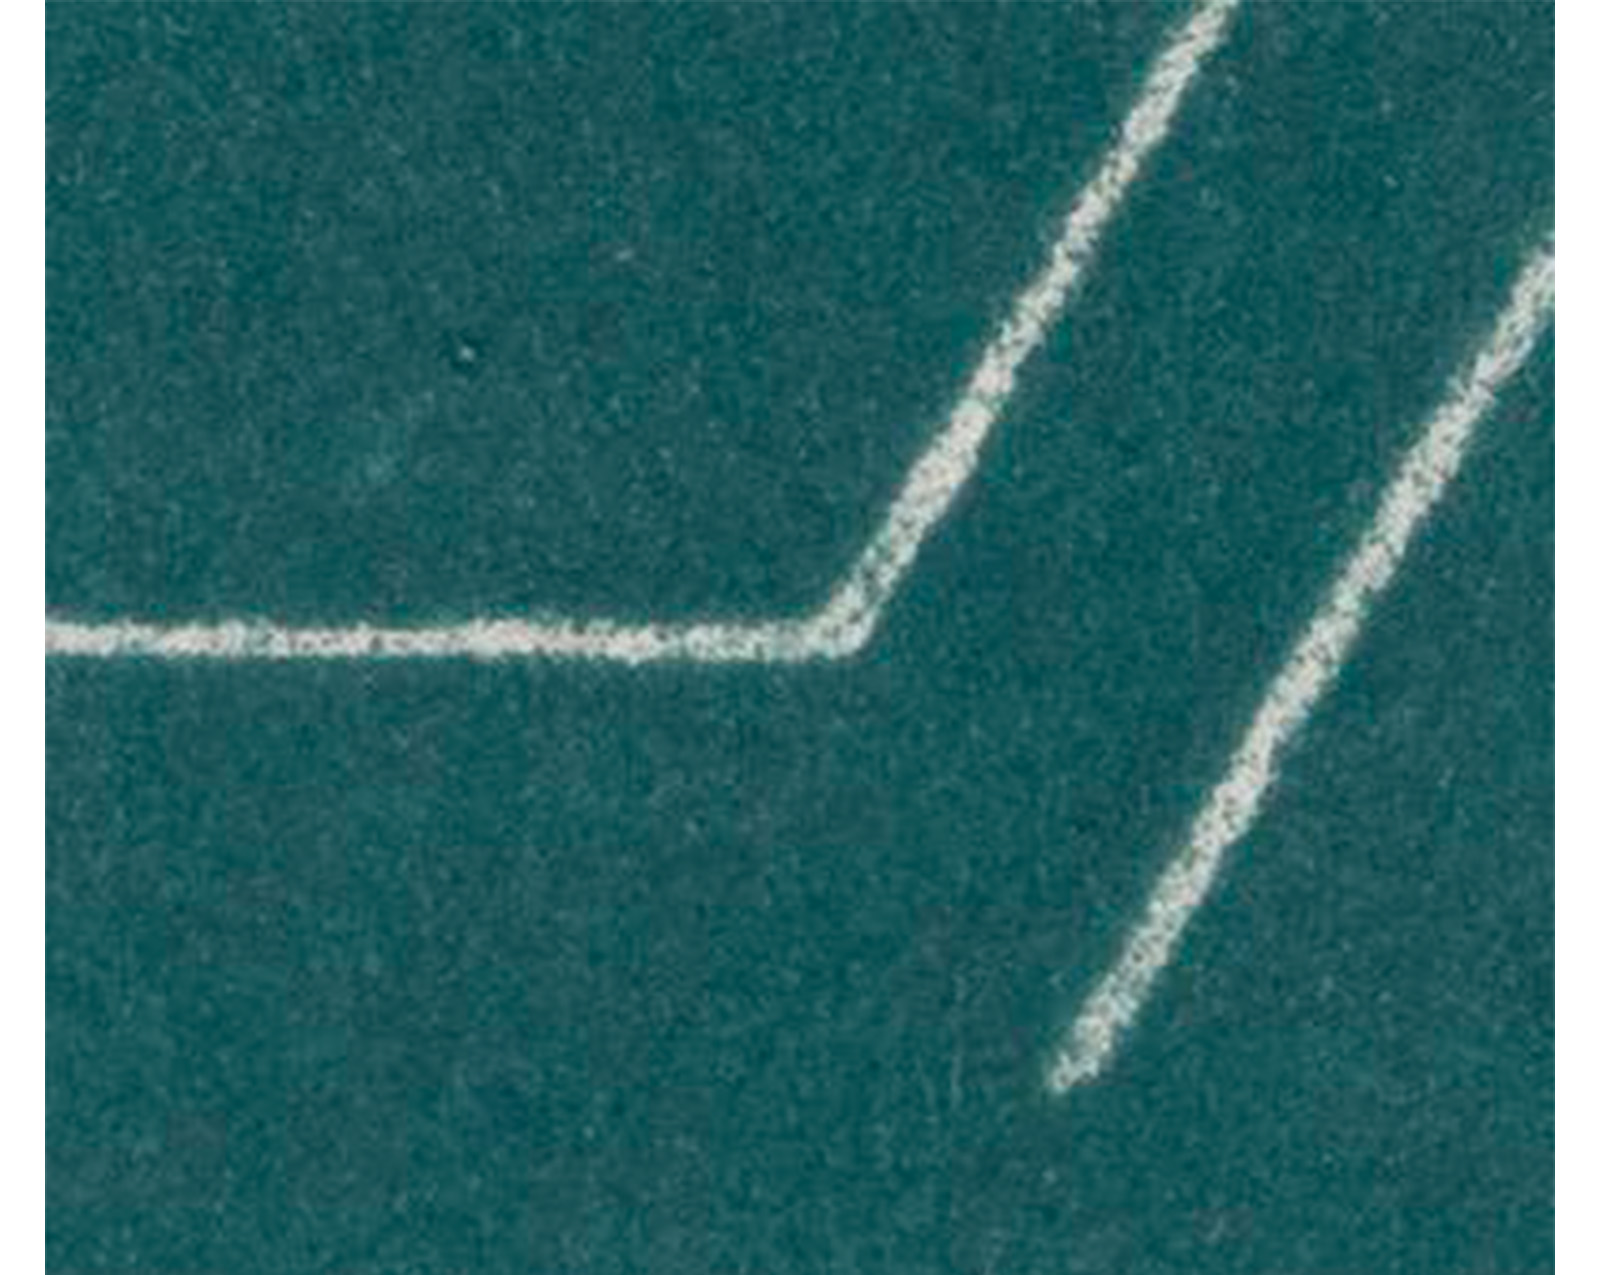 thin, white lines on a blue-green background. the top line forms a V, the bottom line is diagonal and extends off the page